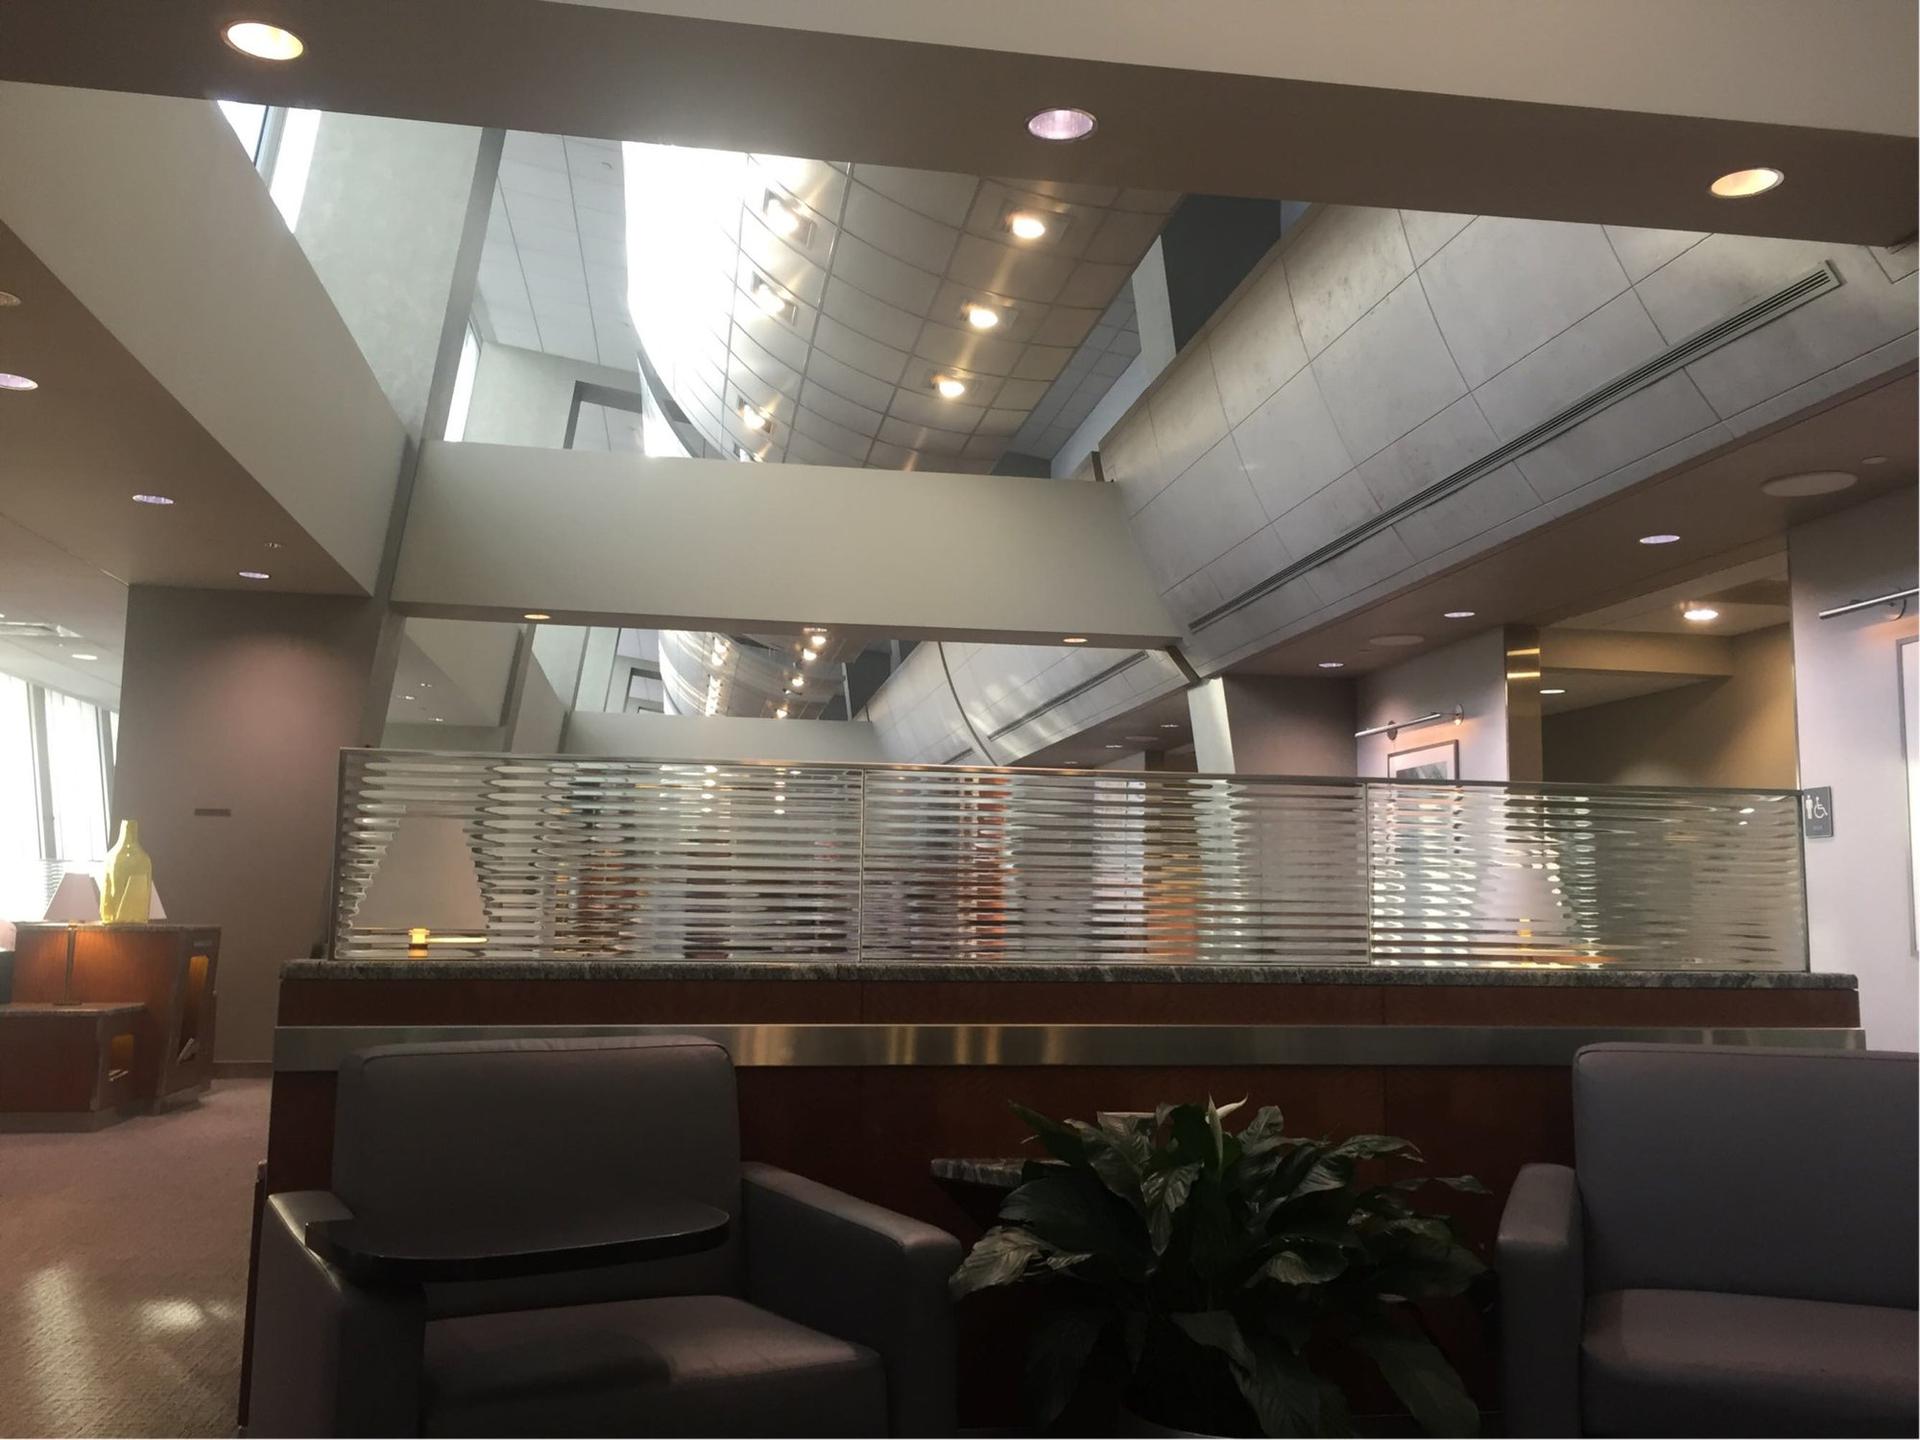 American Airlines Admirals Club image 47 of 48